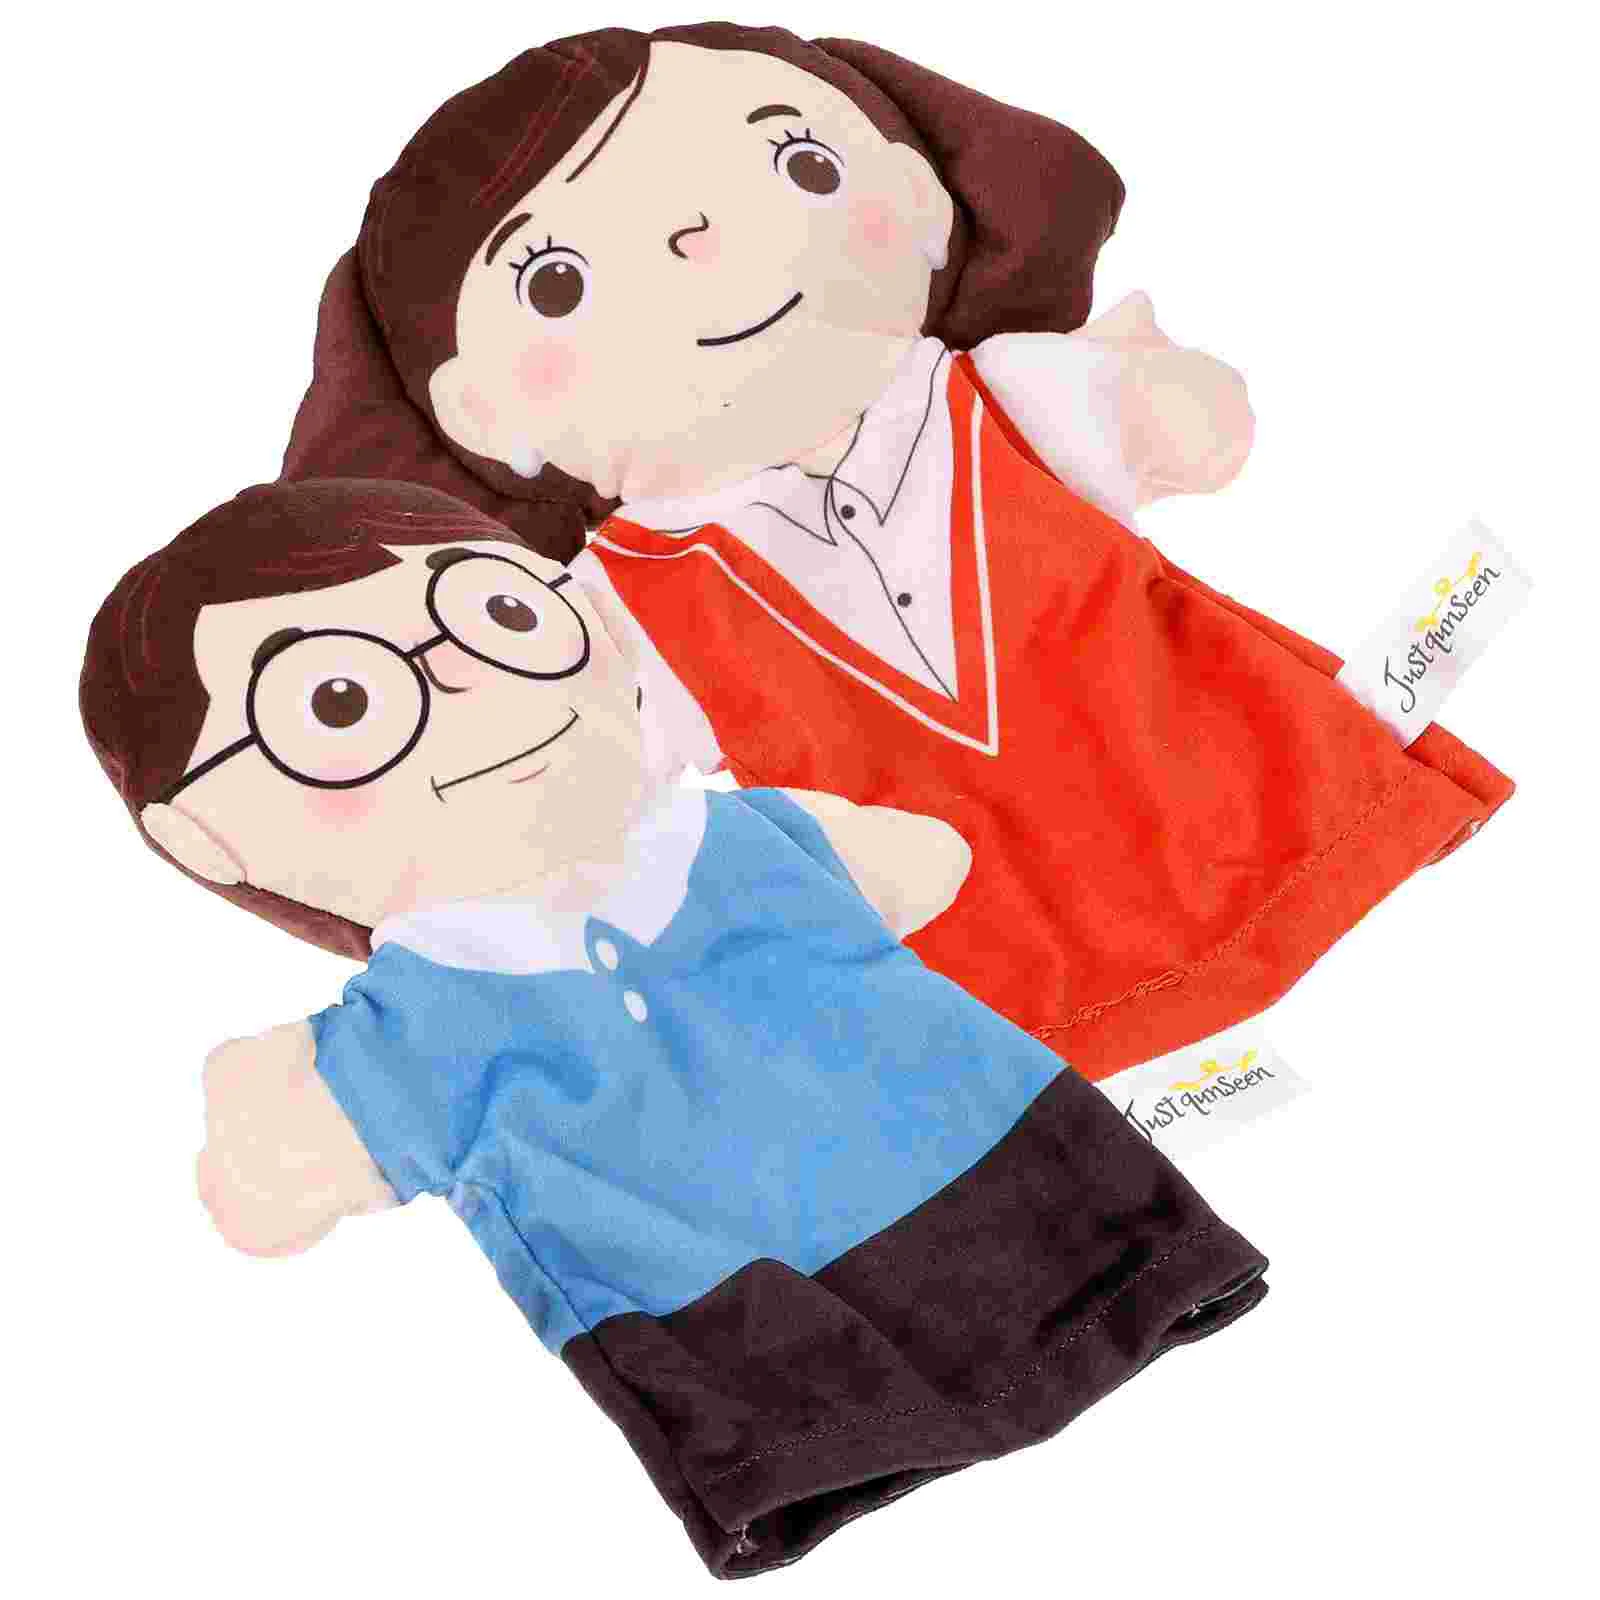 

2 Pcs Toys Character Hand Puppet Puppets for Kids Creative Figure Puzzle Children Story Adults Parent-child